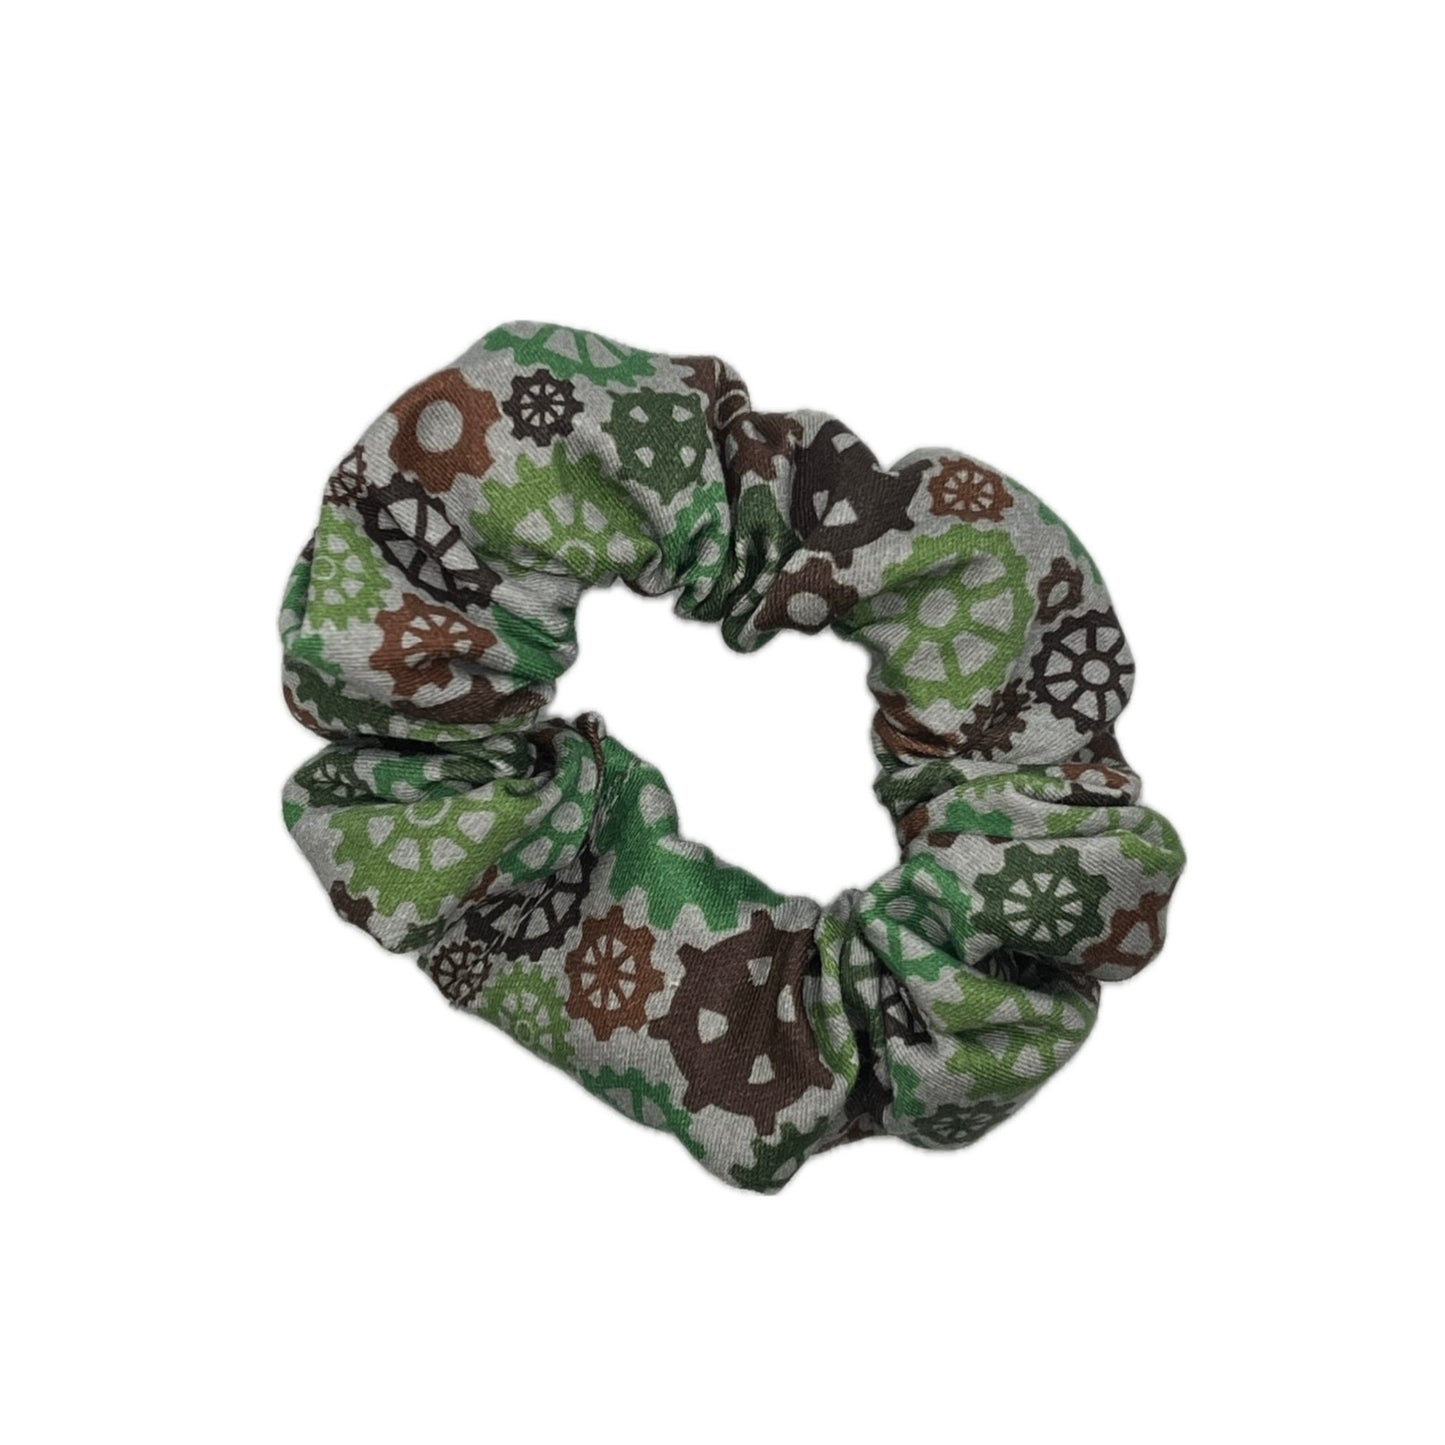 Wicked Cogs Scrunchie - Inspired by Wicked